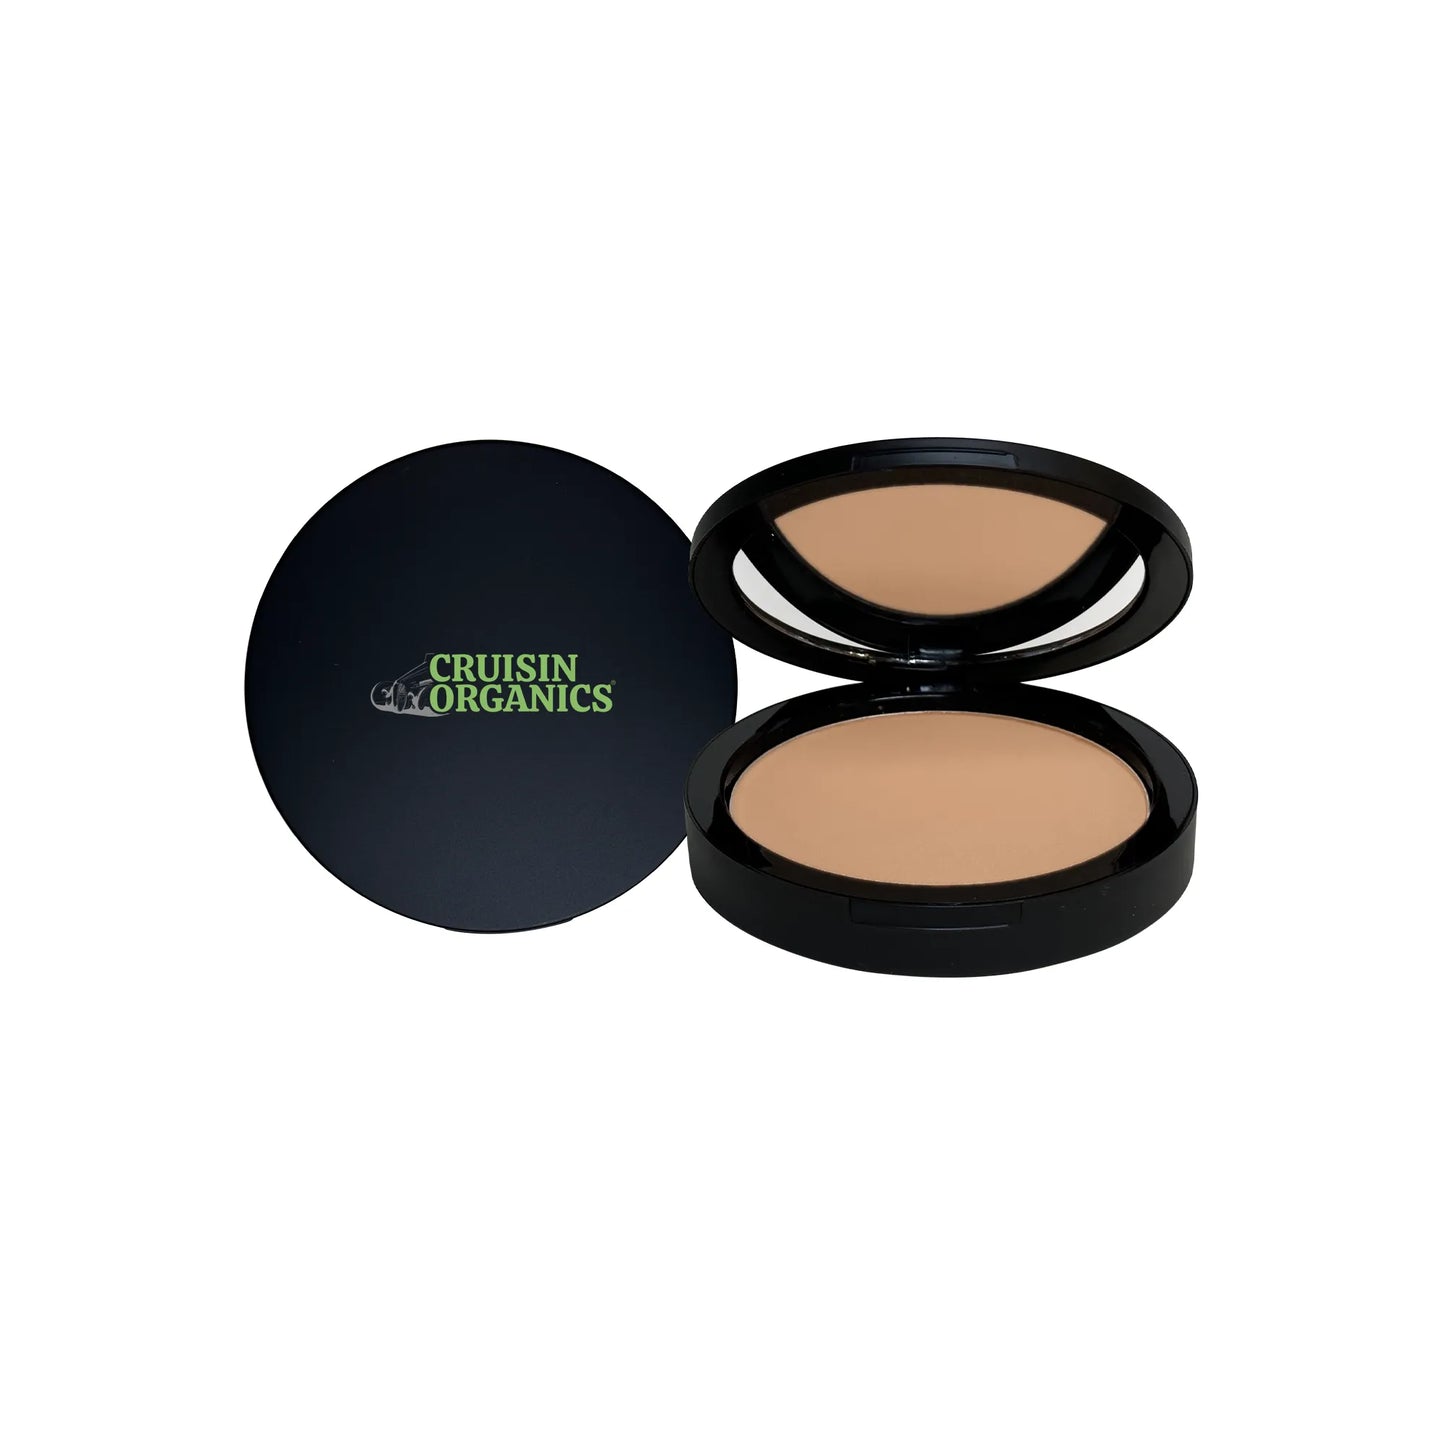 Prepare yourself for the game ahead with Breeze Dual Blend Powder Foundation from Cruisin Organics. This powdered foundation provides a refreshing blend of ingredients for a flawless and long-lasting finish. Get ready to conquer the day with ease and confidence.